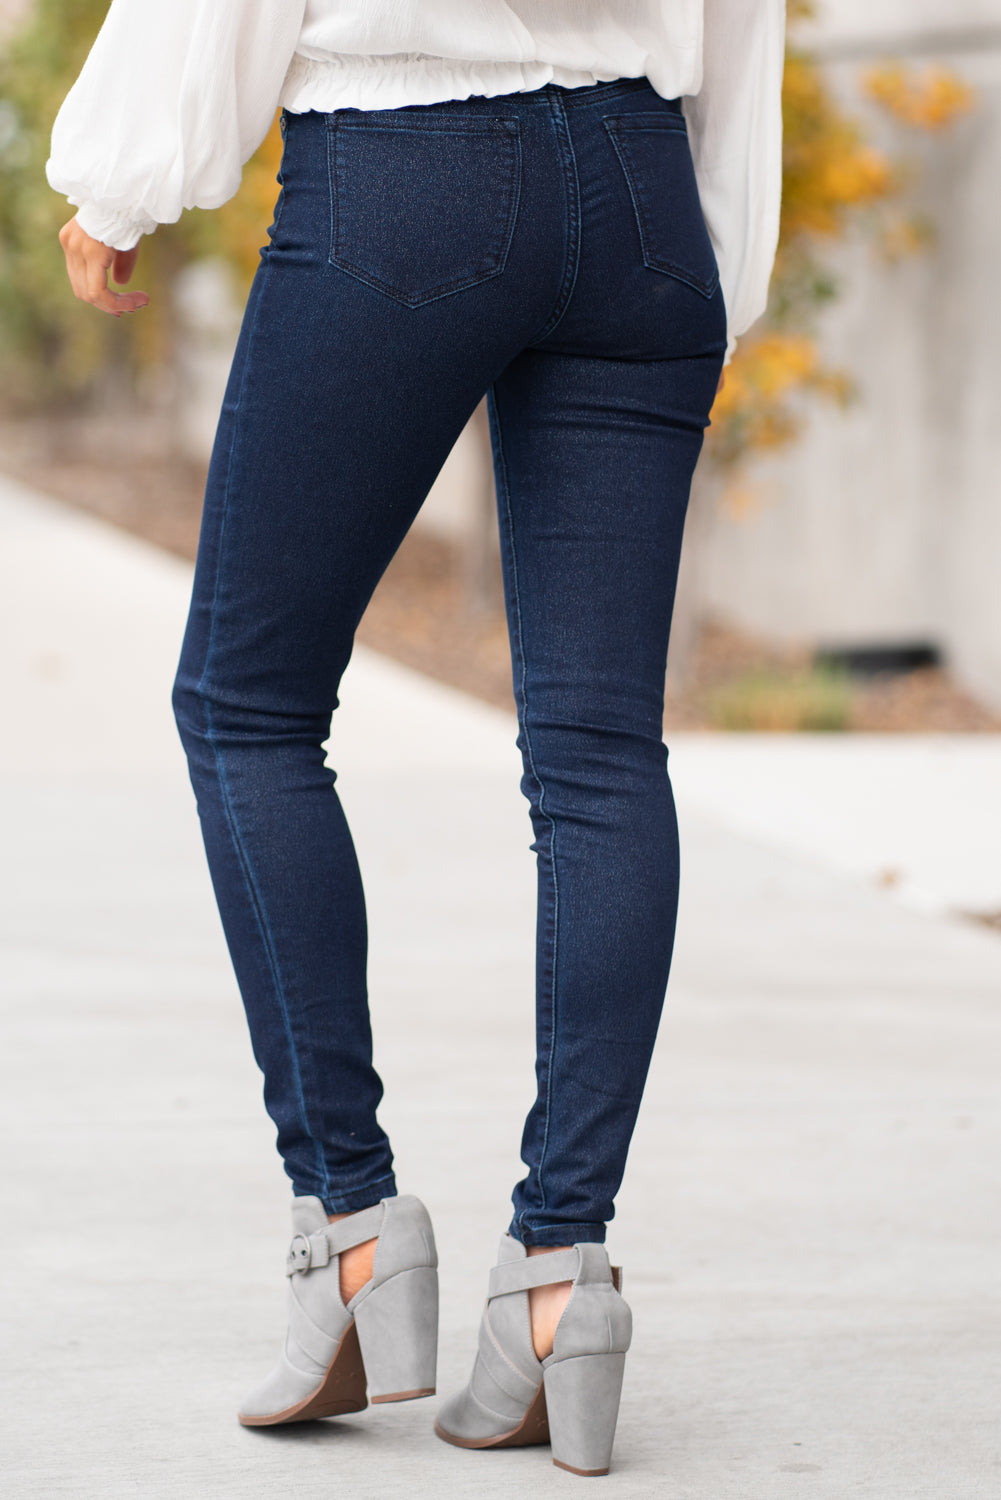 KanCan Jeans  Collection: Fall 2020  Color: Dark Wash Cut: Super Skinny, 29.5" Inseam Rise: High-Rise, 9.5" Front Rise Material: COTTON 74.5% POLYESTER 24% SPANDEX 1.5% Detail: Sparkle Coated Dark Blue Rinse Wash Fly: Zipper Fly Style #: KC7129R Contact us for any additional measurements or sizing.  Haley wears a size small top, a 25 in jeans and a small in tops. She is wearing a size 25 in these jeans.